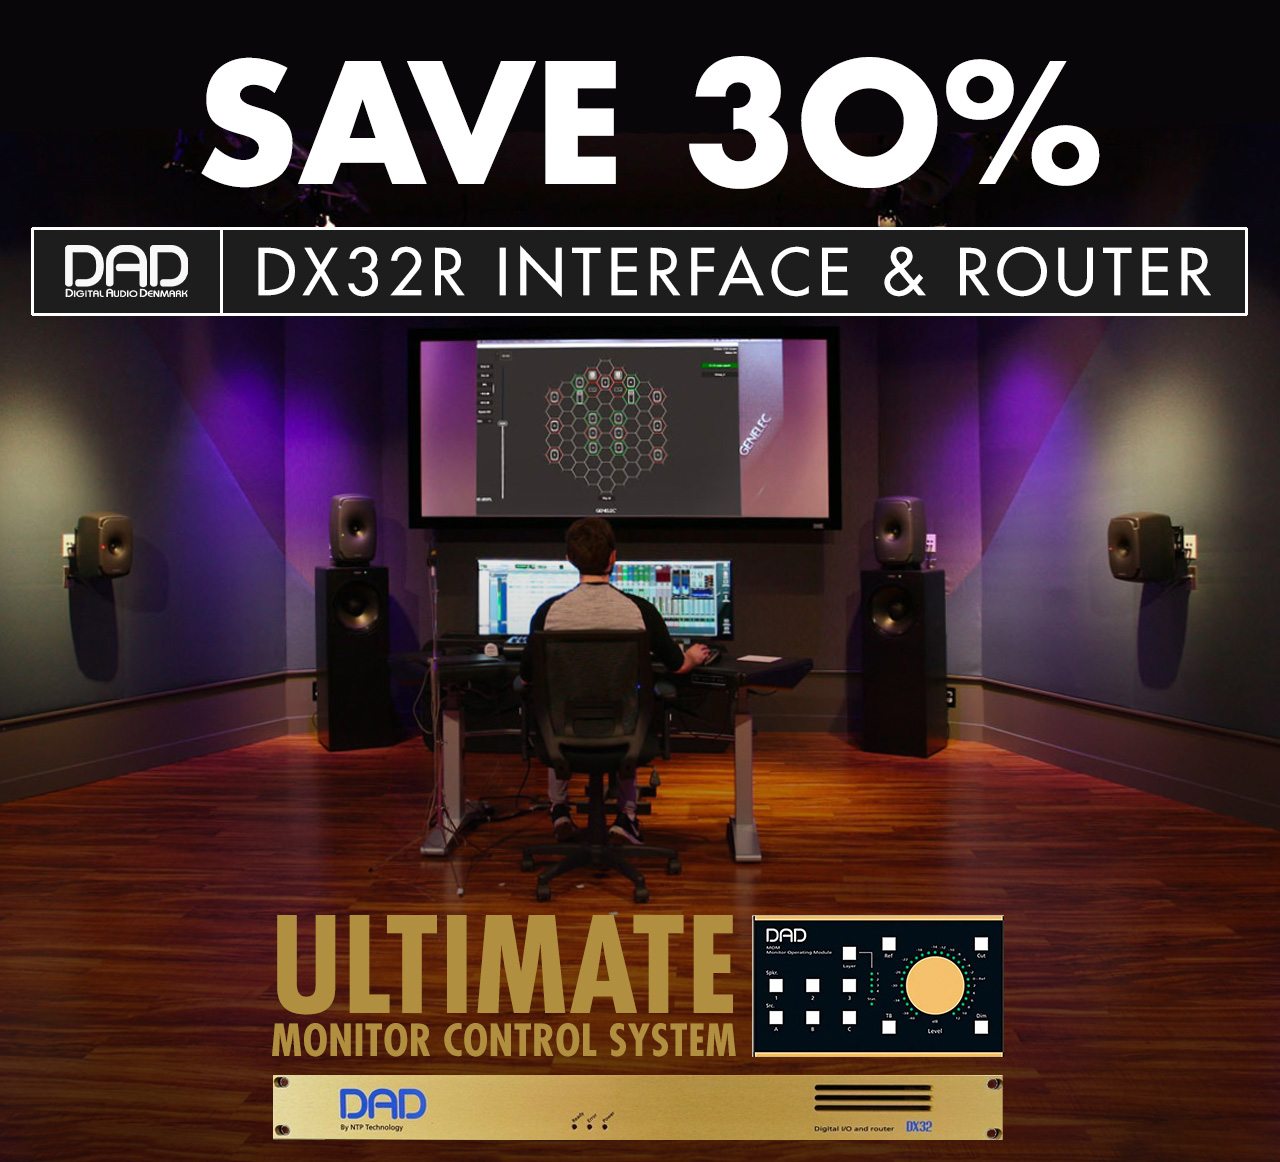 Save 30% On DAD's DX32R Interface & Router